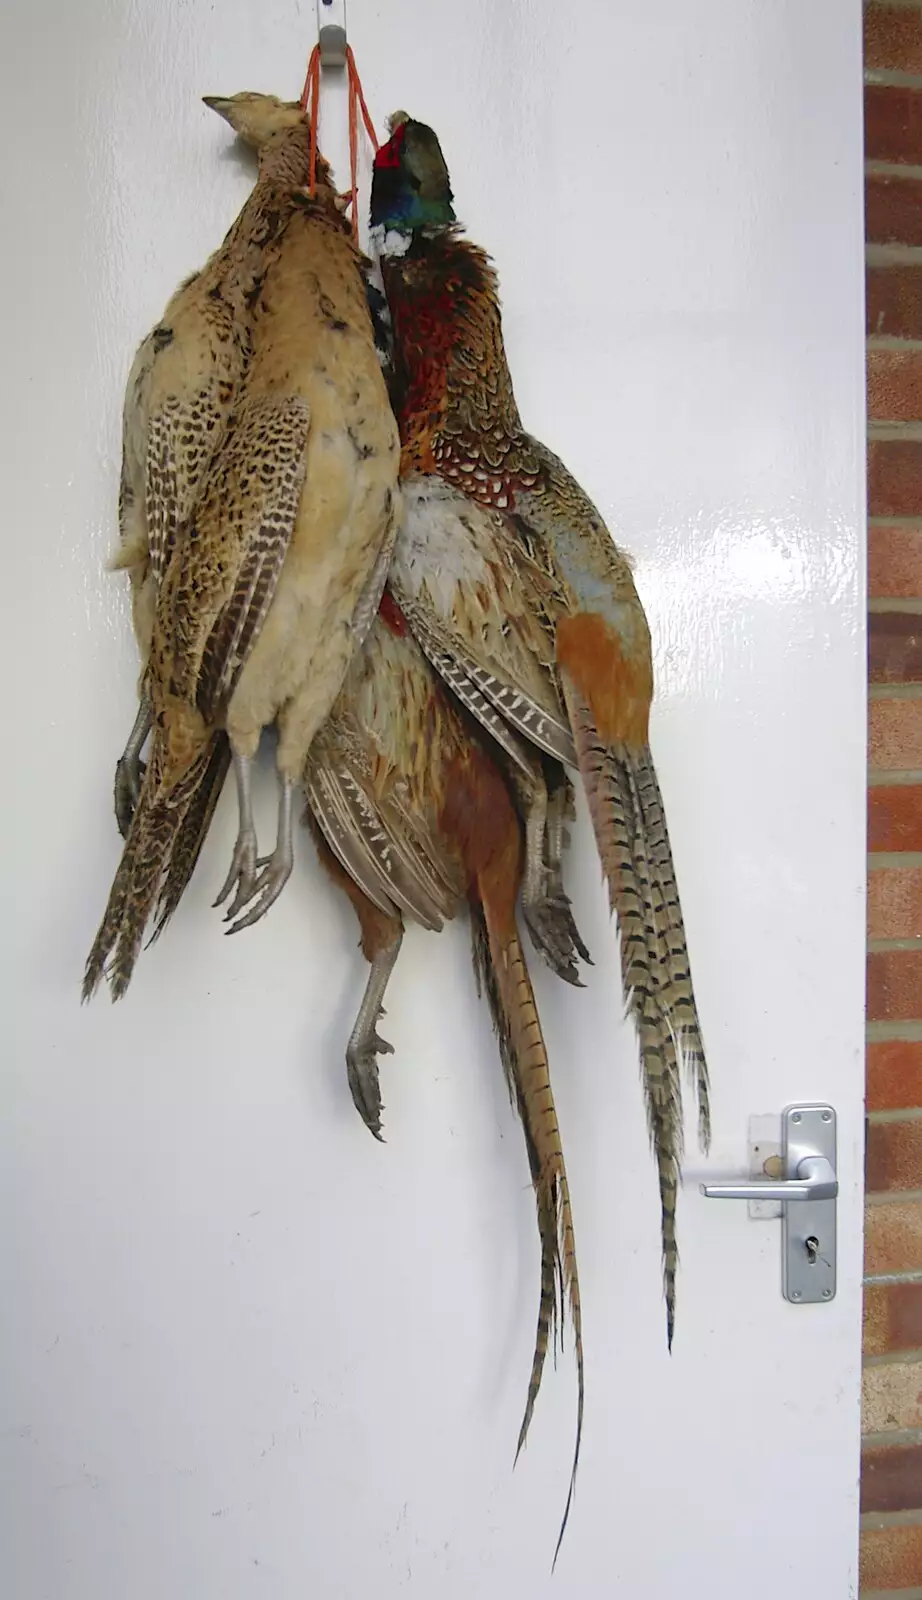 Pheasants hang on the door of Valley Farm, from Pheasants, Sunsets and The BBs at Bressingham, Norfolk - 11th December 2005